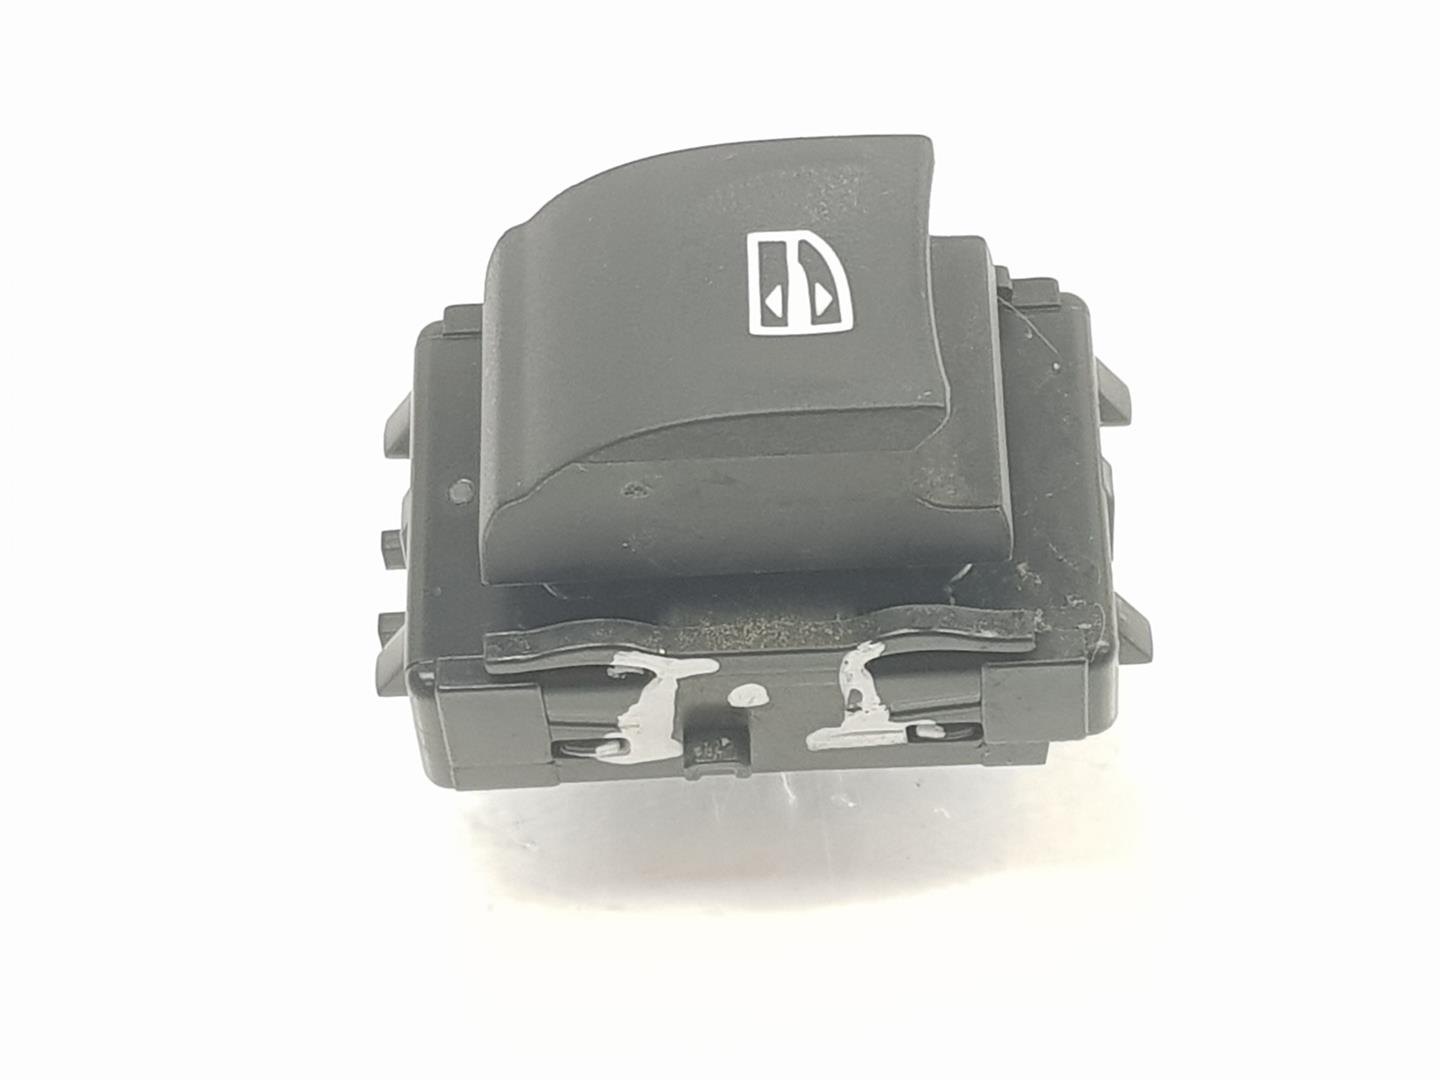 RENAULT Scenic 3 generation (2009-2015) Rear Right Door Window Control Switch 254010003R, 254010003R 21421421